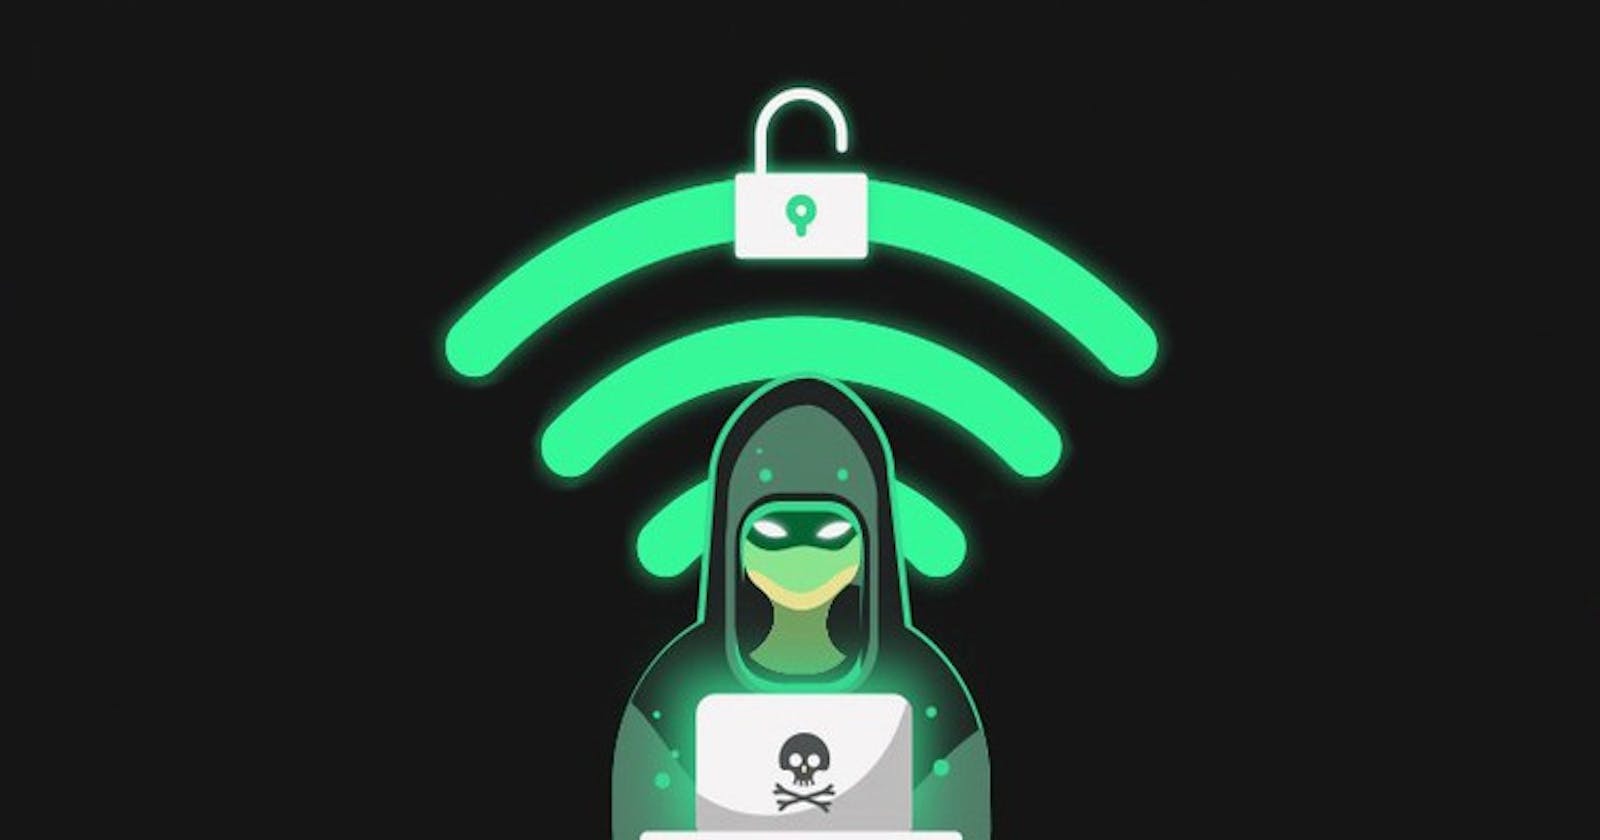 How to Hack your friend's WEP Wifi connection?